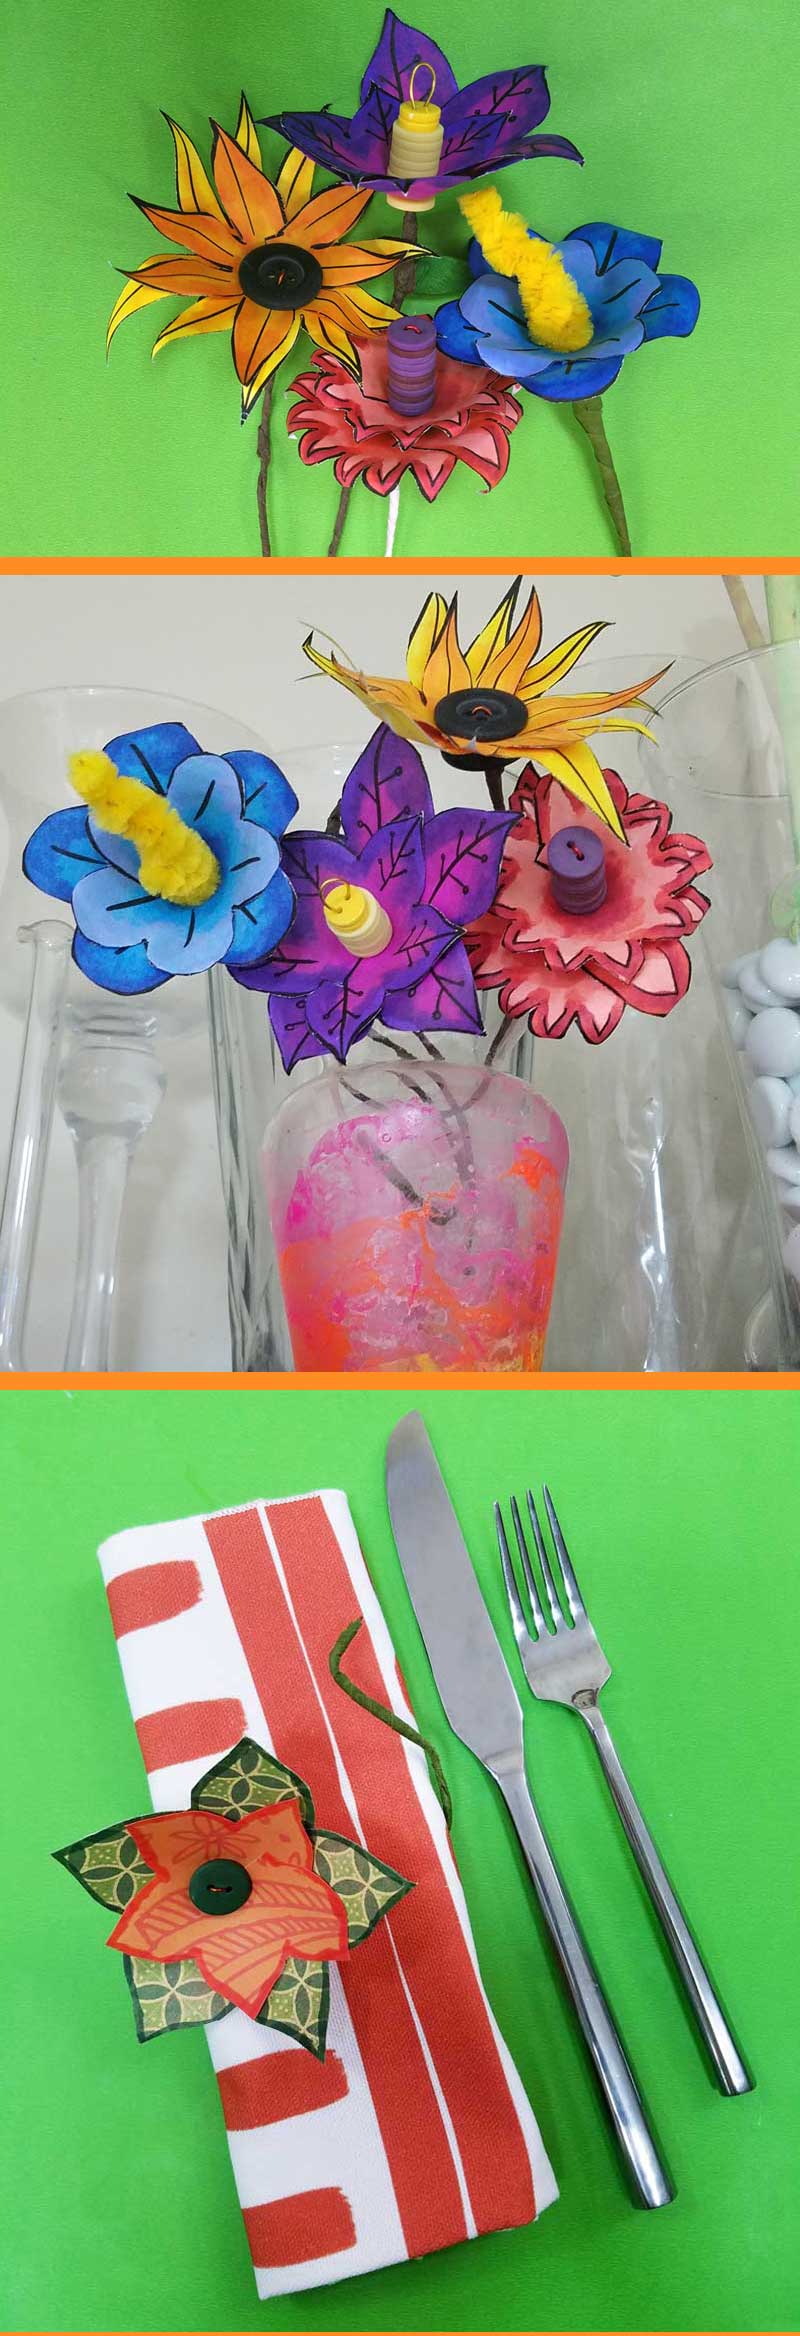 These paper flower templates are too cute for words! What an adorable Spring craft for tweens, teens, or grown-ups! This papercraft is so versatile - use it to set a Spring table, as napkin rings, or put these DIY flowers in a vase. These paper flowers can be made by coloring them in, or using scrapbook paper scraps. #papercraft #spring #freeprintable